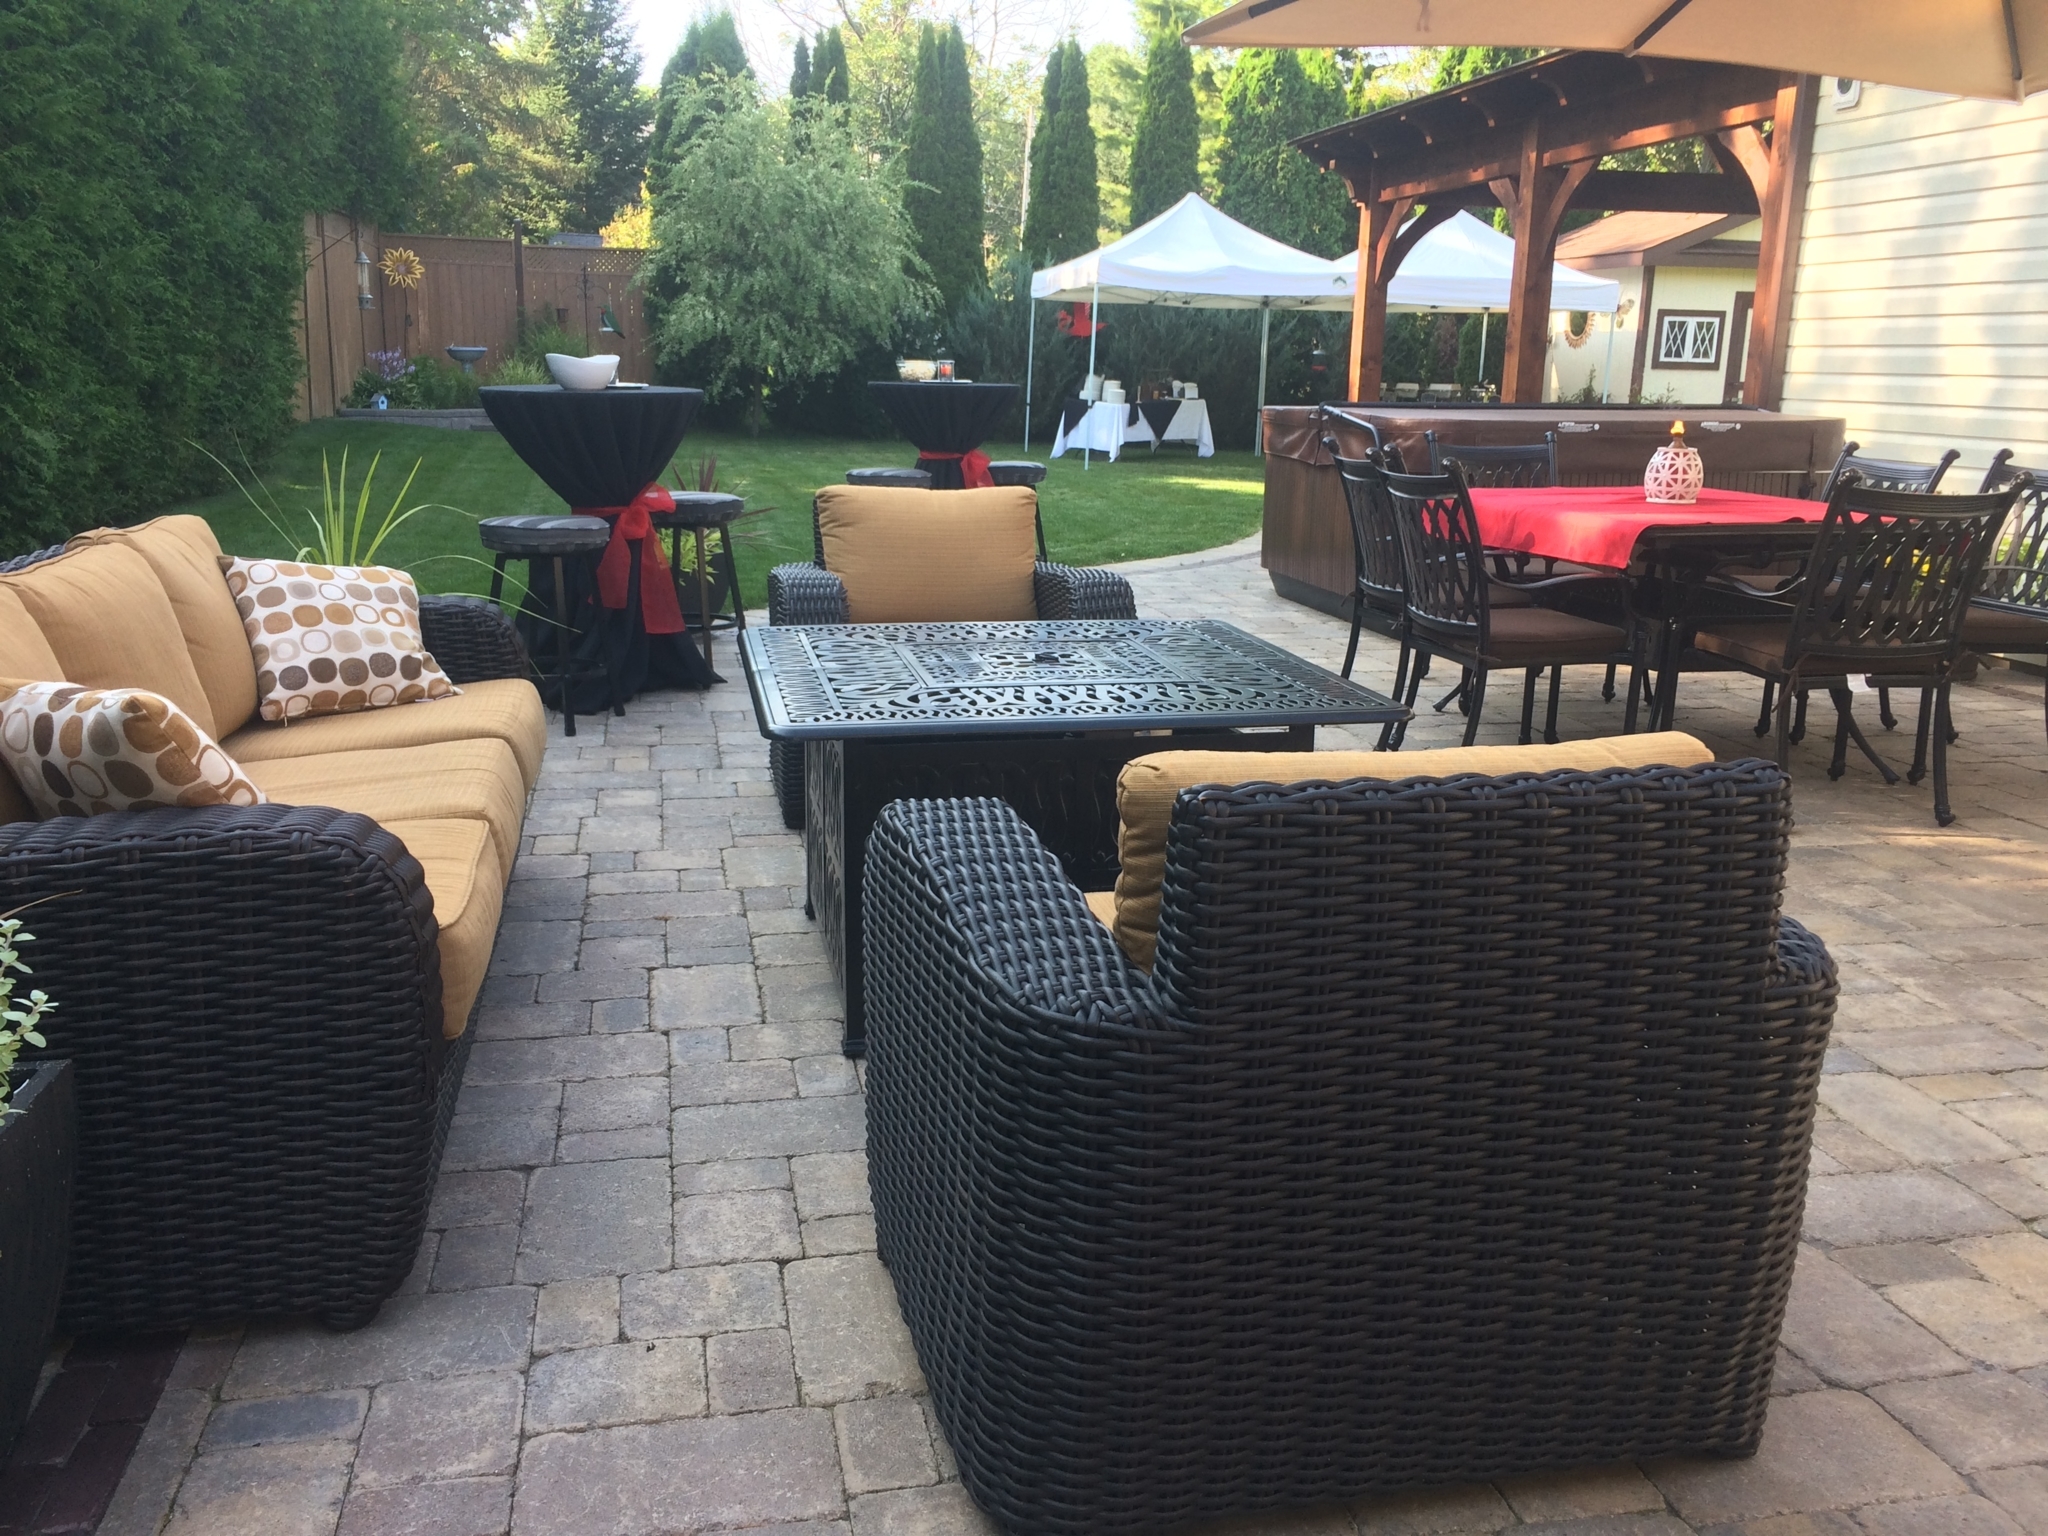 Dot Furniture 231 Essa Rd Barrie On, Patio Furniture Barrie Ontario